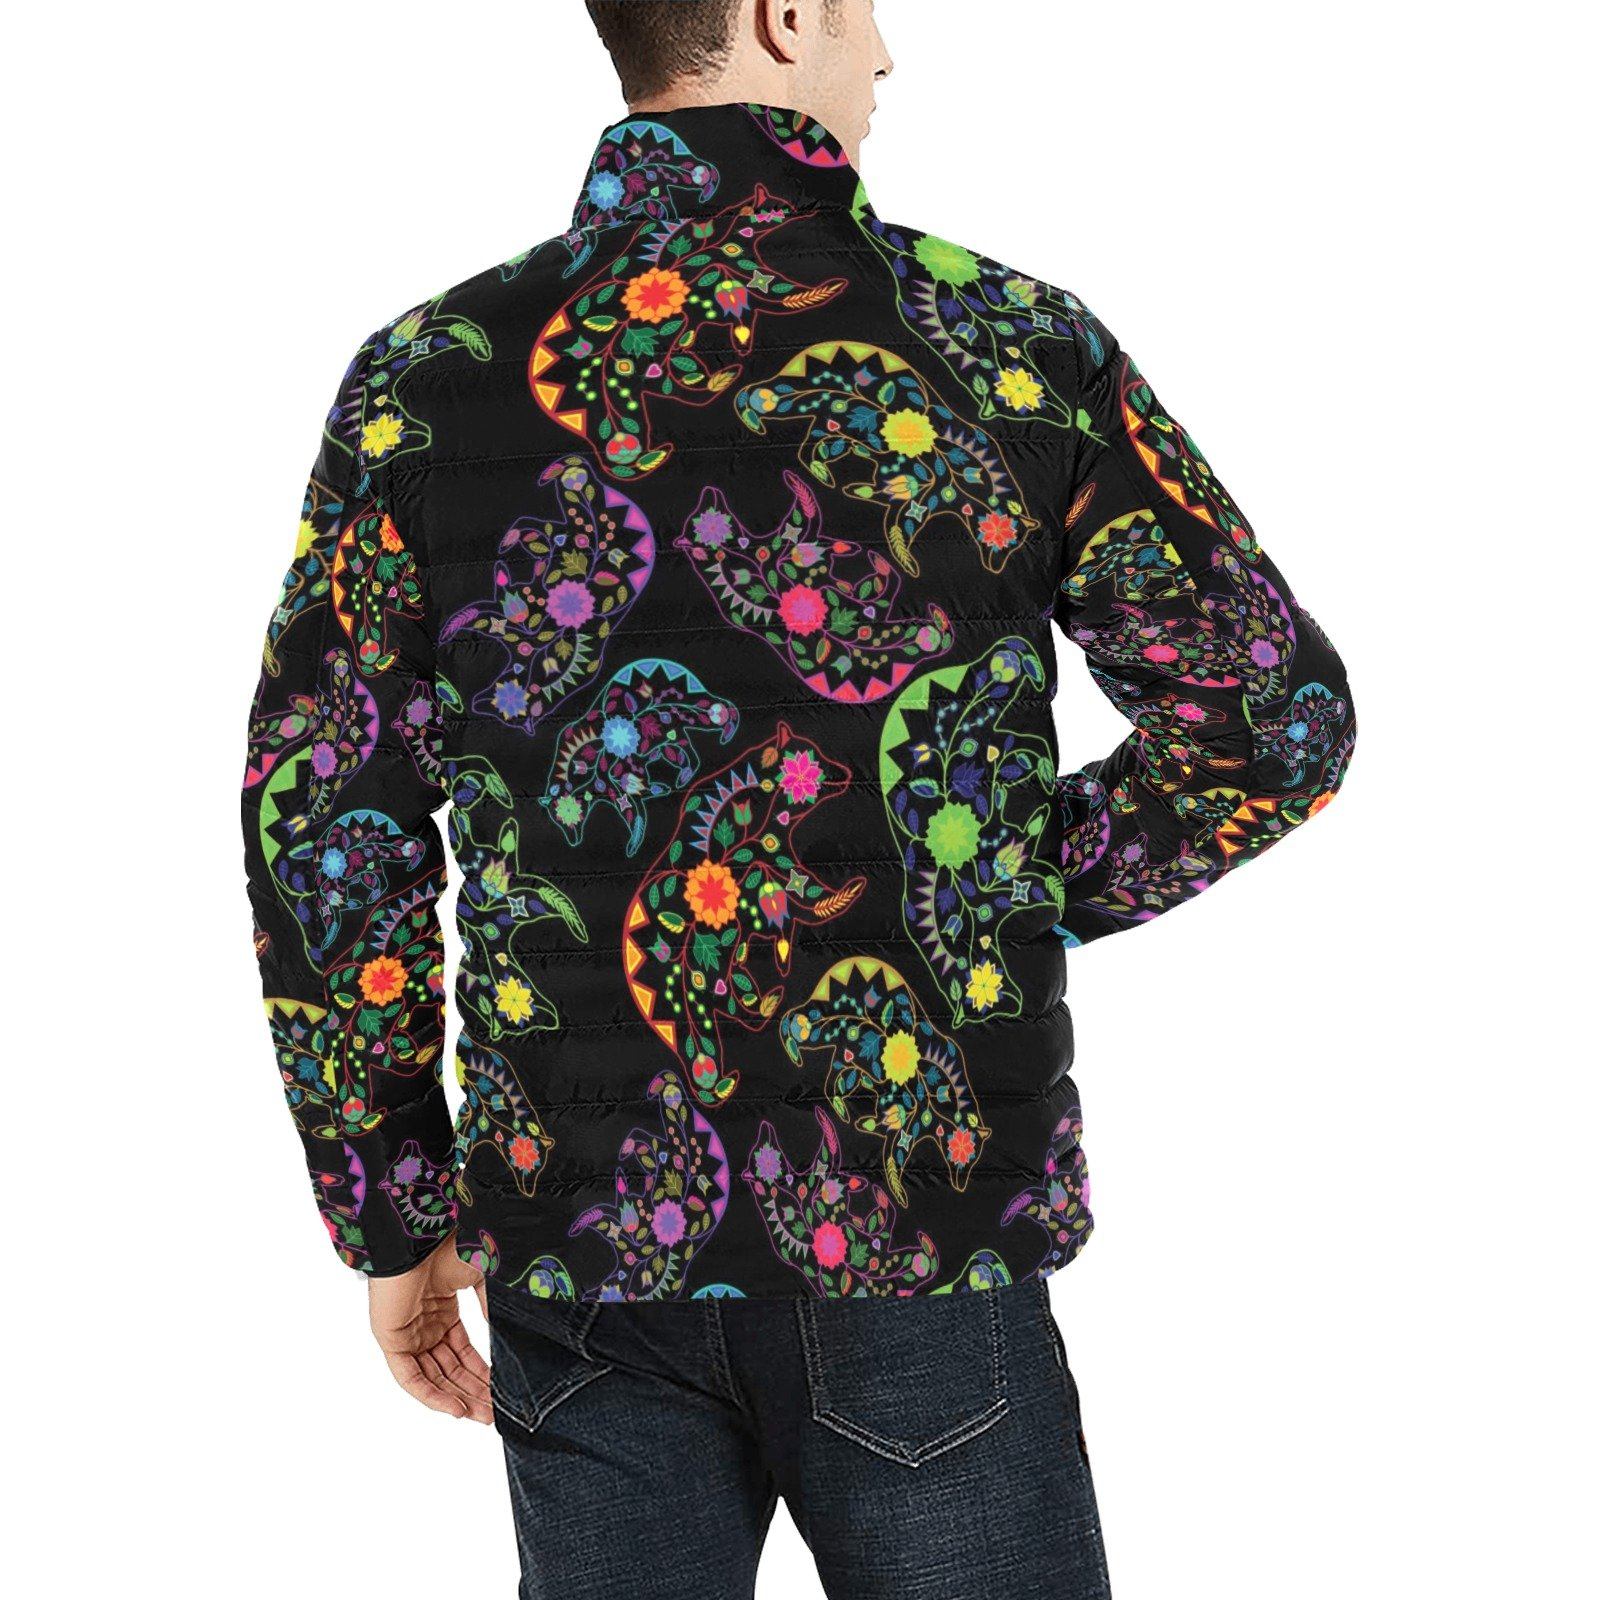 Floral Bear Men's Stand Collar Padded Jacket (Model H41) Men's Stand Collar Padded Jacket (H41) e-joyer 